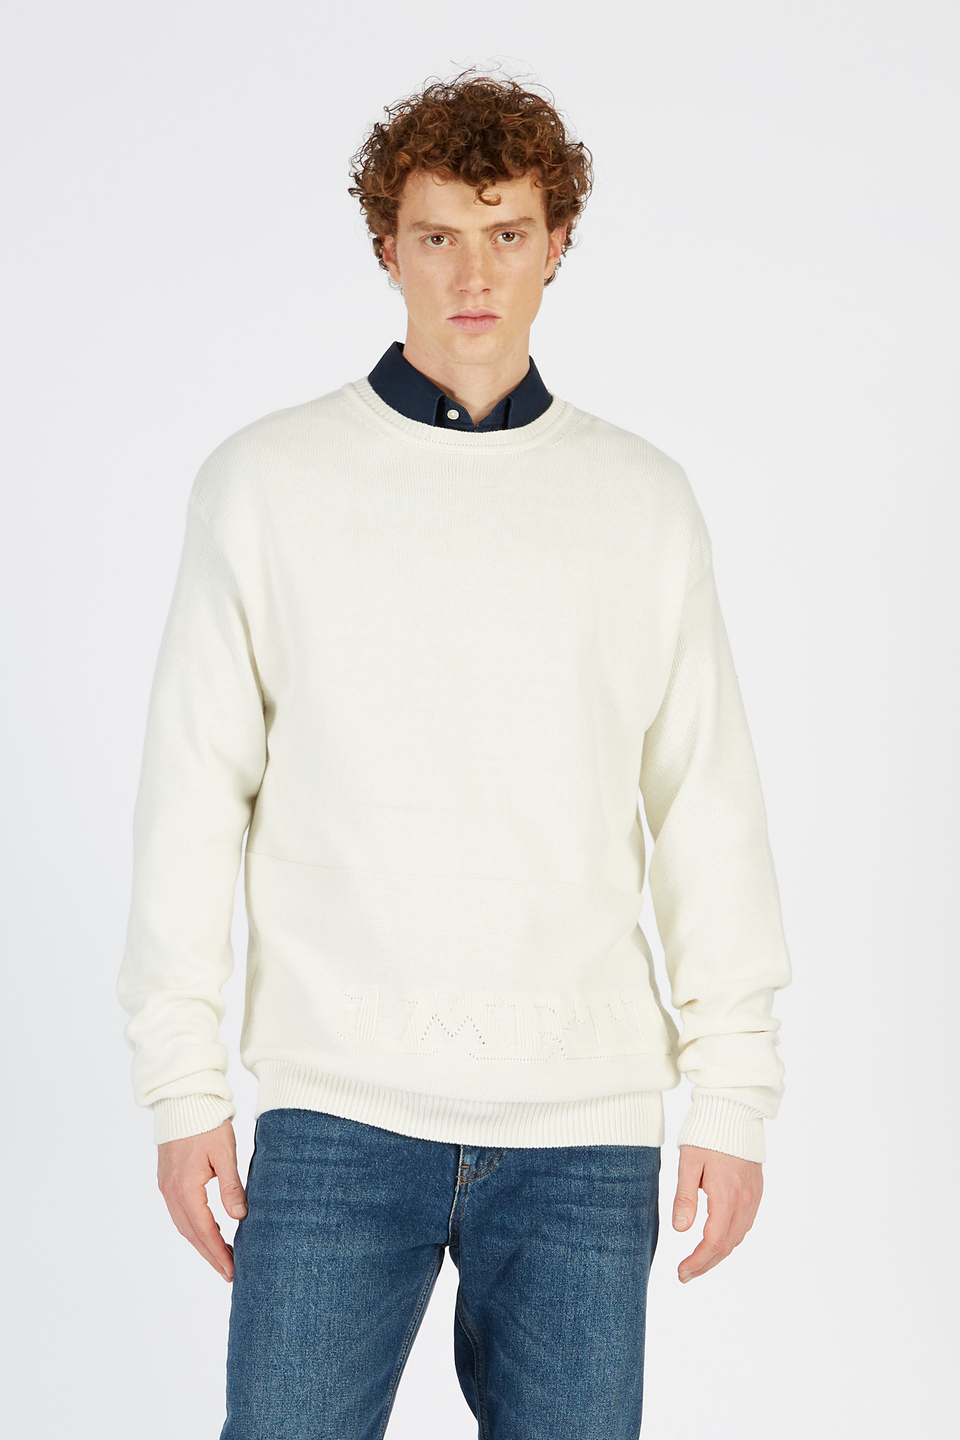 Men’s sweatshirt in cotton and wool with long sleeves oversize model | La Martina - Official Online Shop